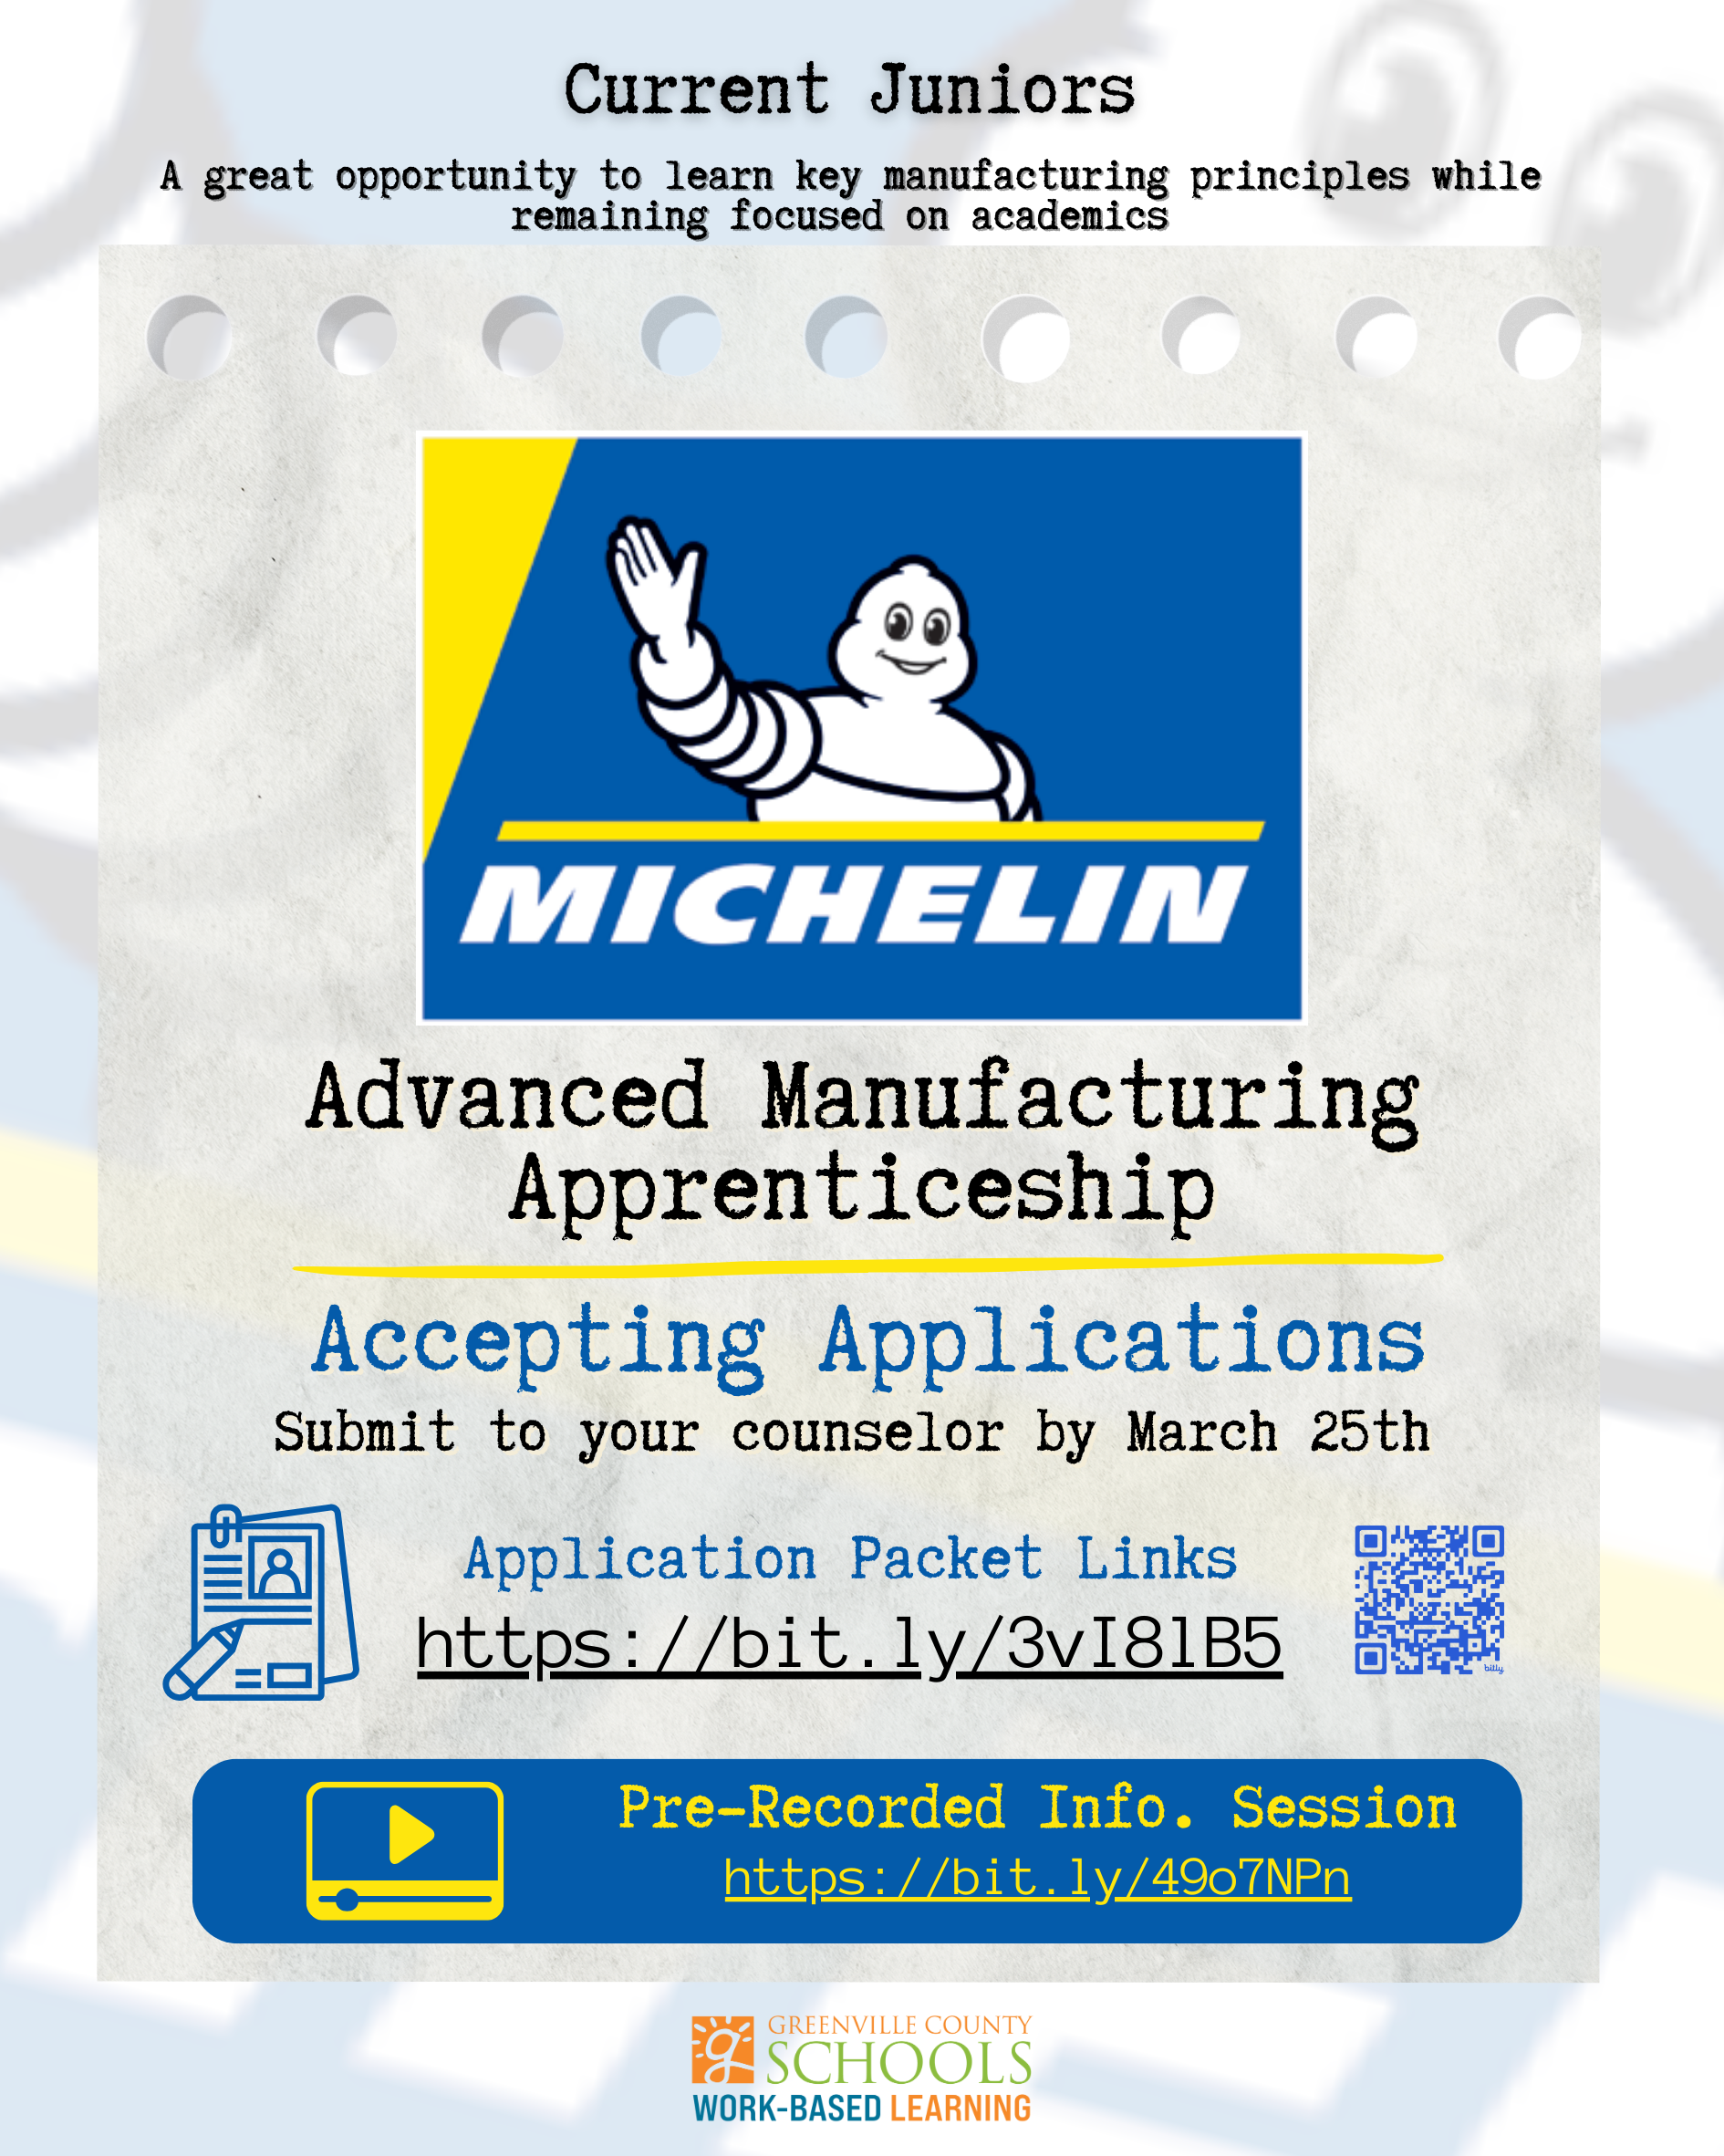 Flyer is white, yellow, and blue with Michelin information